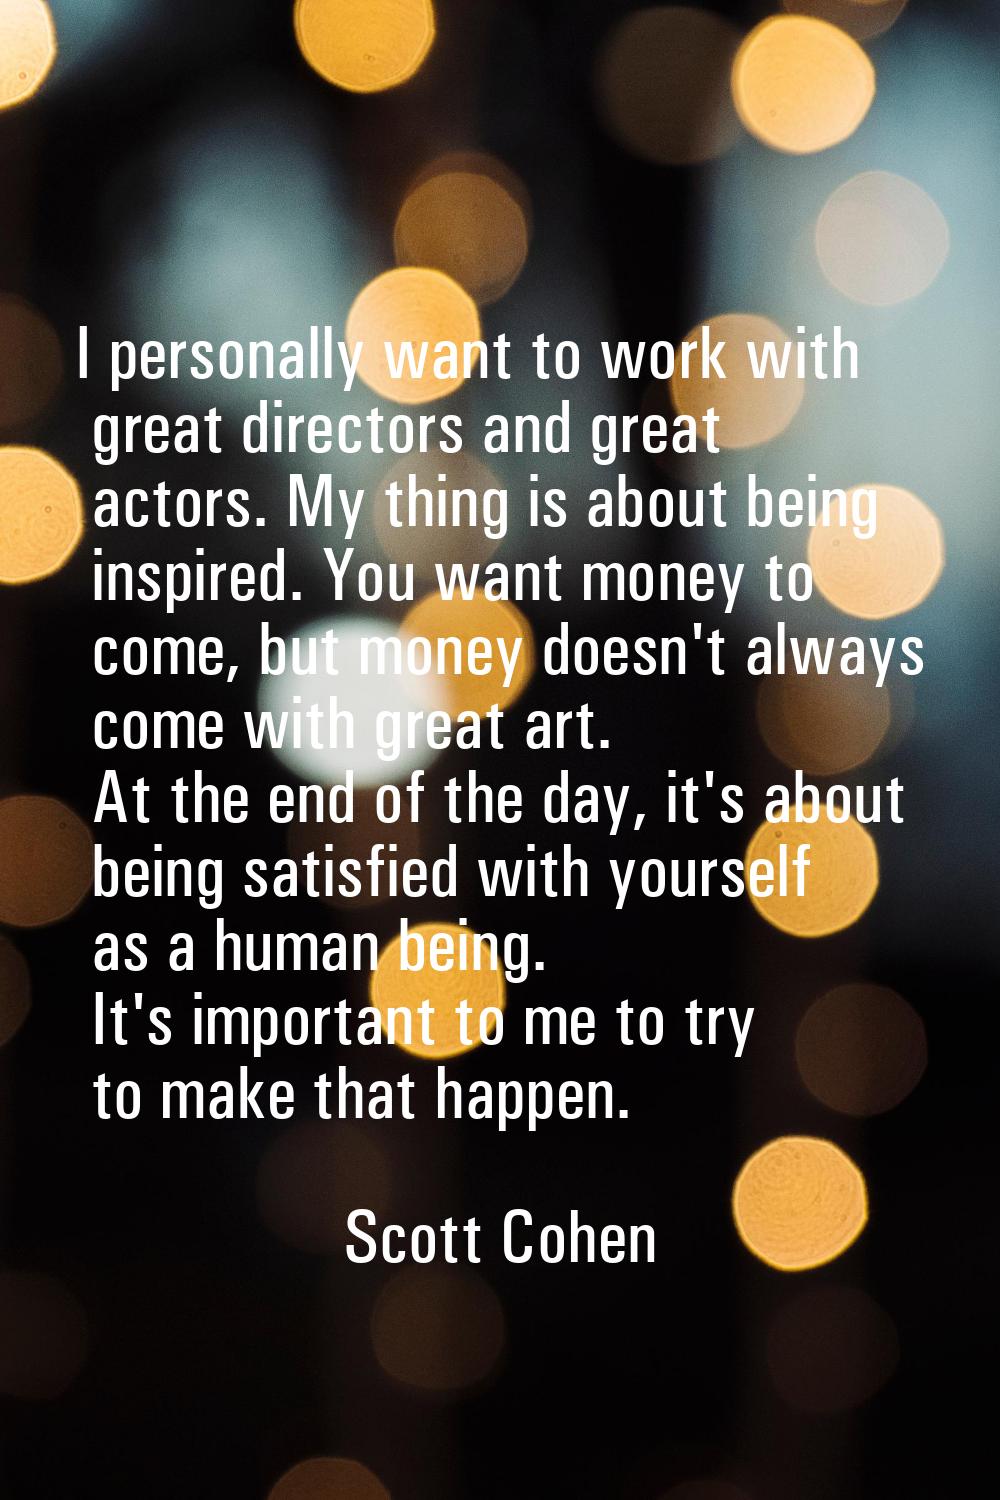 I personally want to work with great directors and great actors. My thing is about being inspired. 